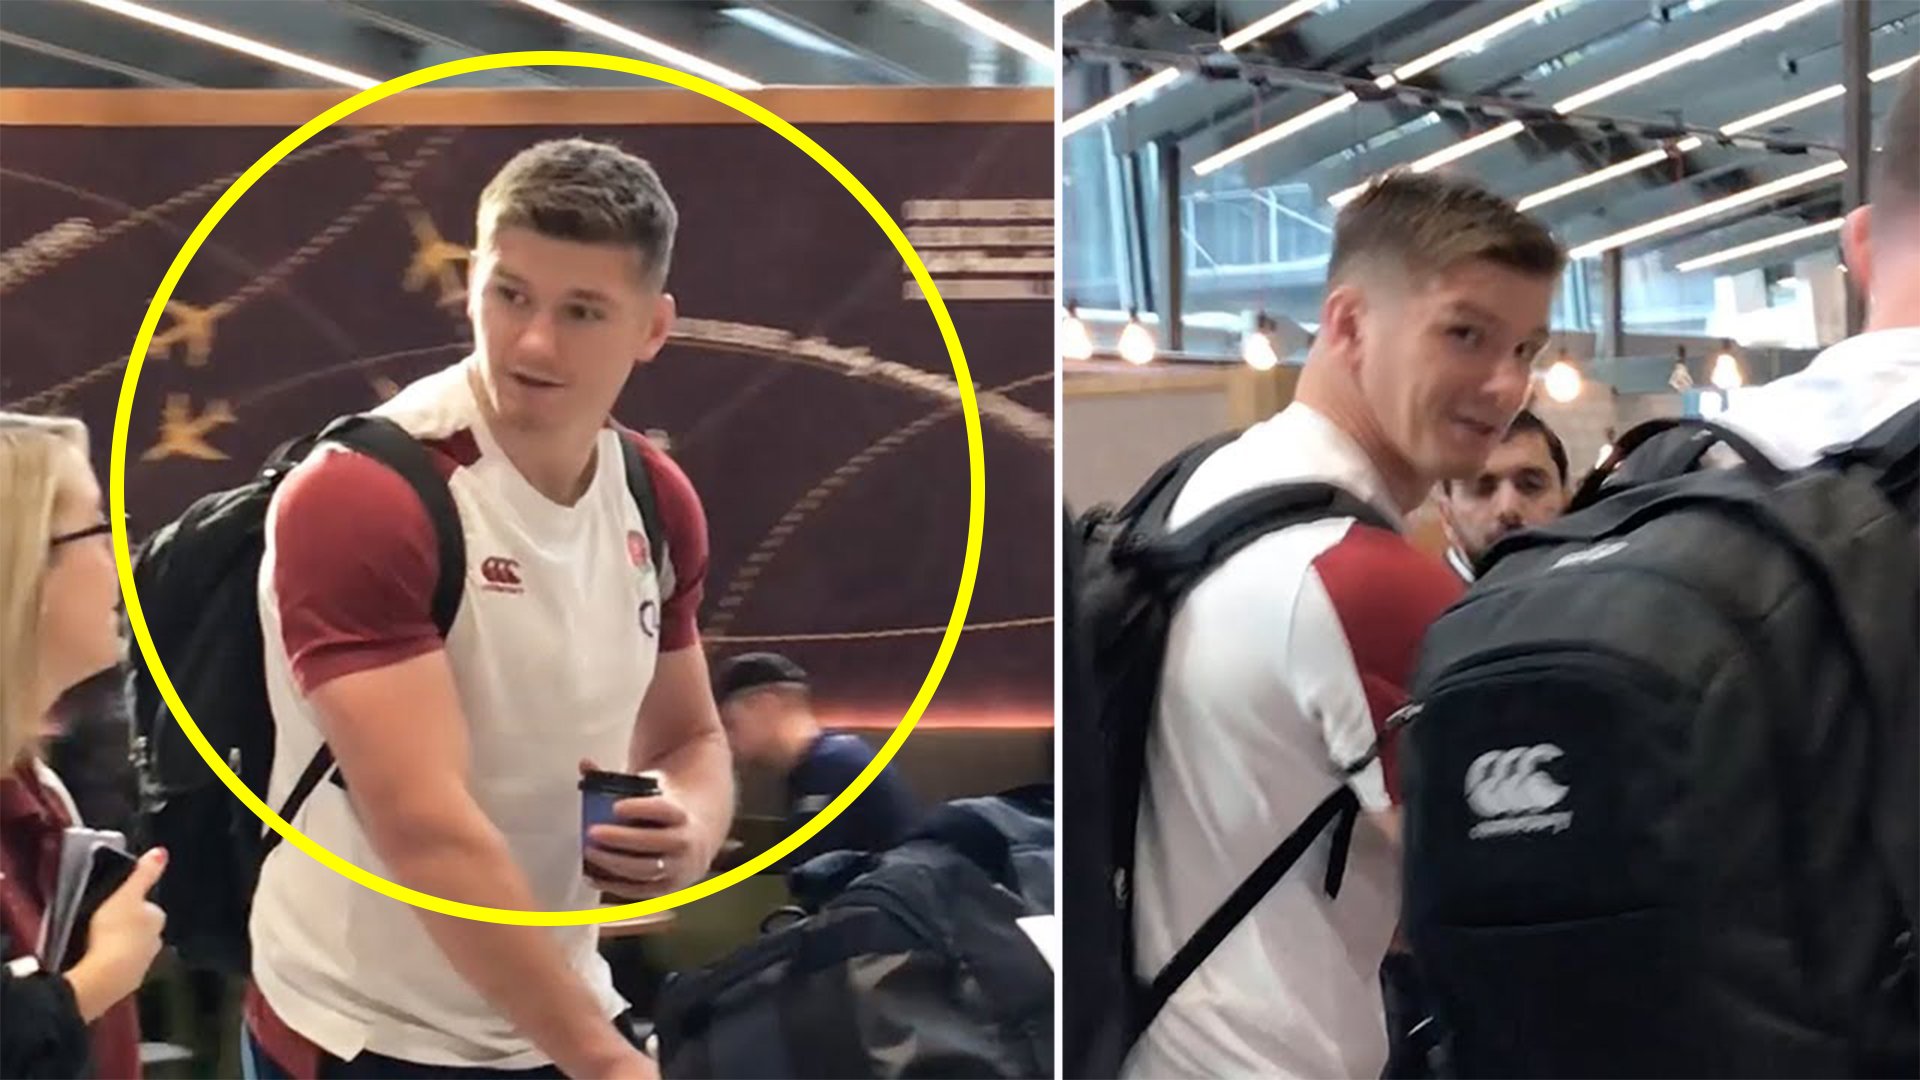 The shocking way in which the England rugby team treated their fans when they returned from the World Cup